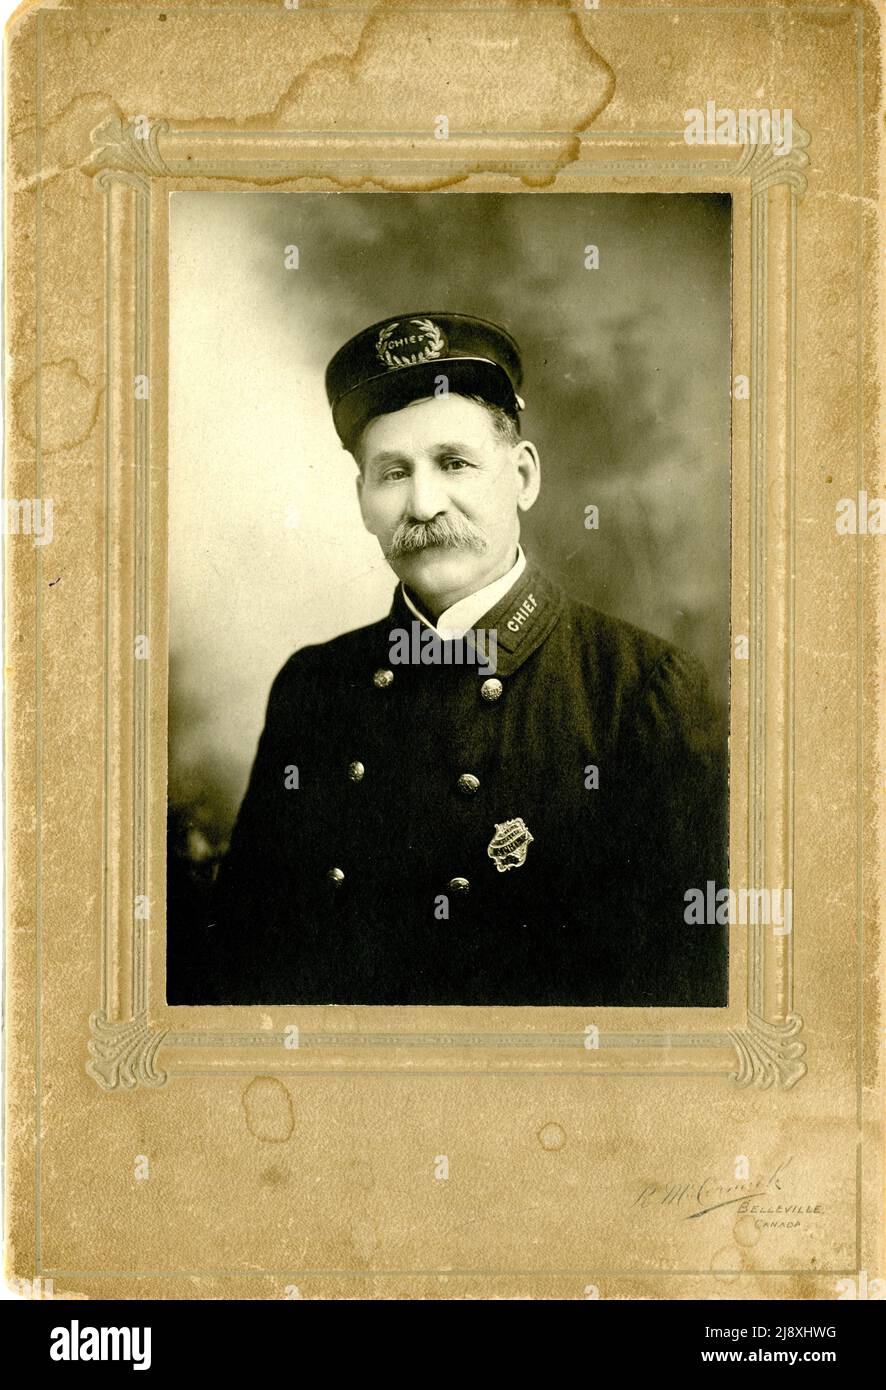 Fire Chief William J. Brown, who was killed in a fire at the Corbin Lock Factory in Belleville, Ontario on 20 September 1929, aged 72  ca.  1916 Stock Photo